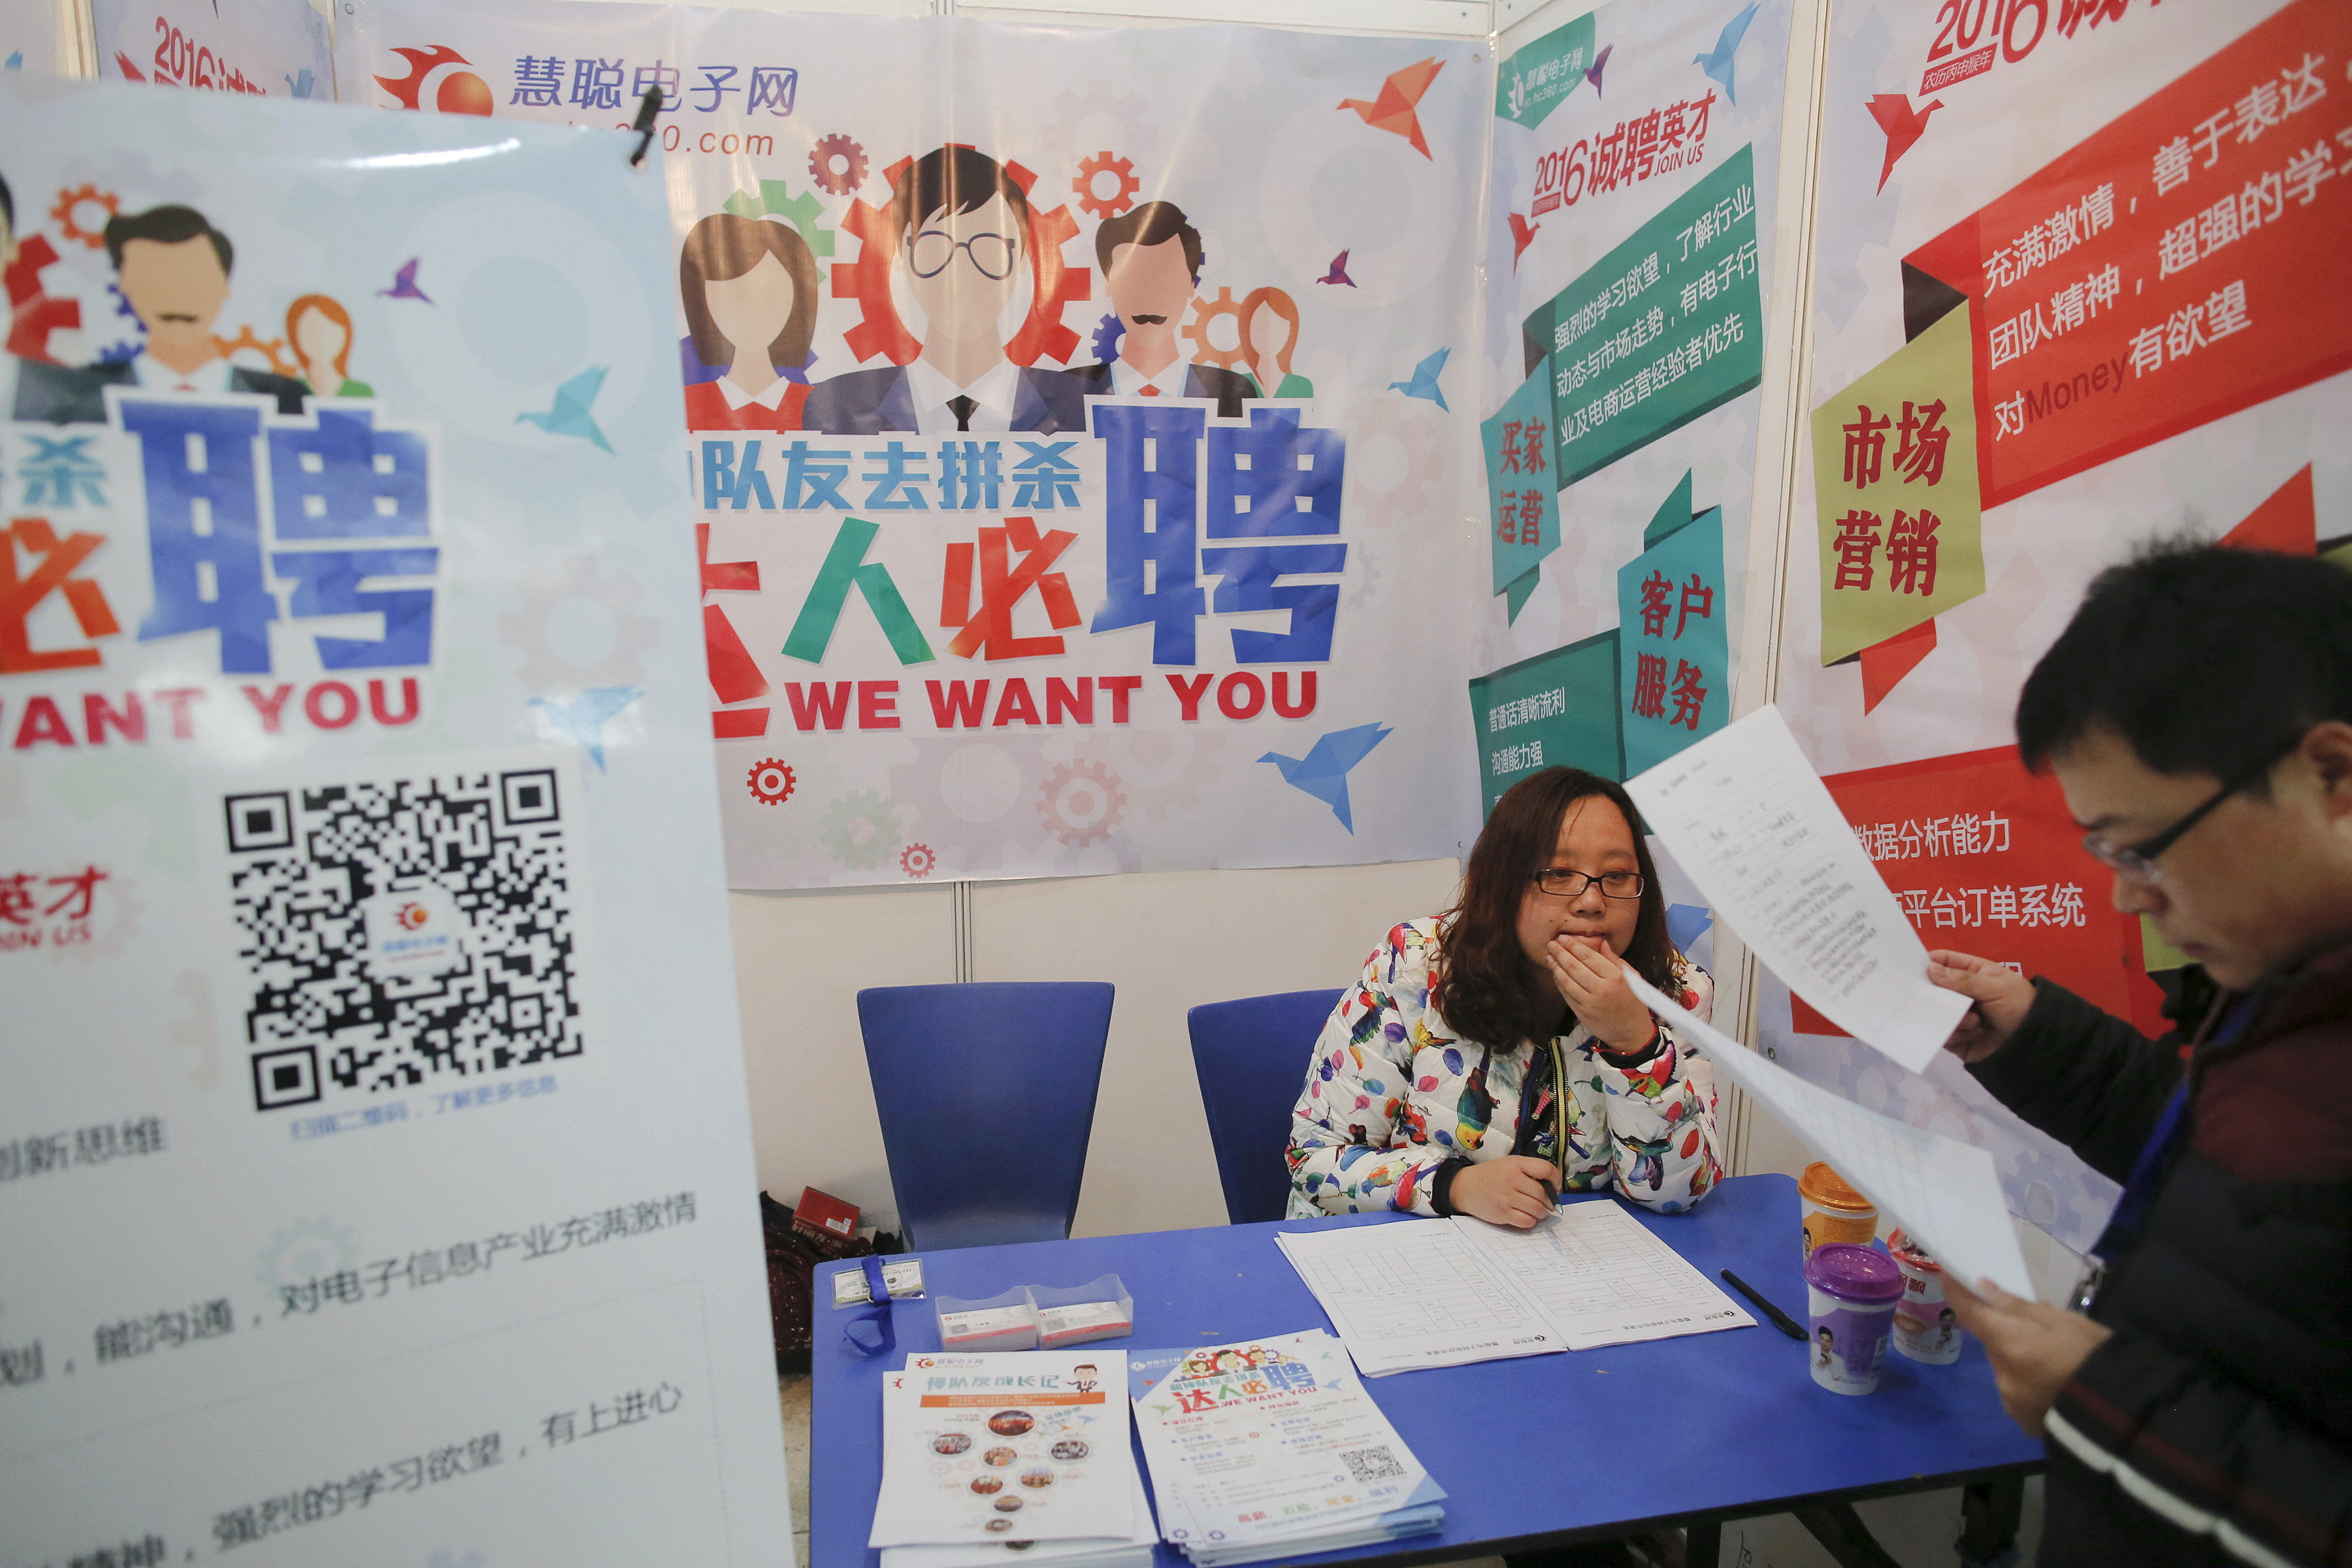 China's youth faces job uncertainty